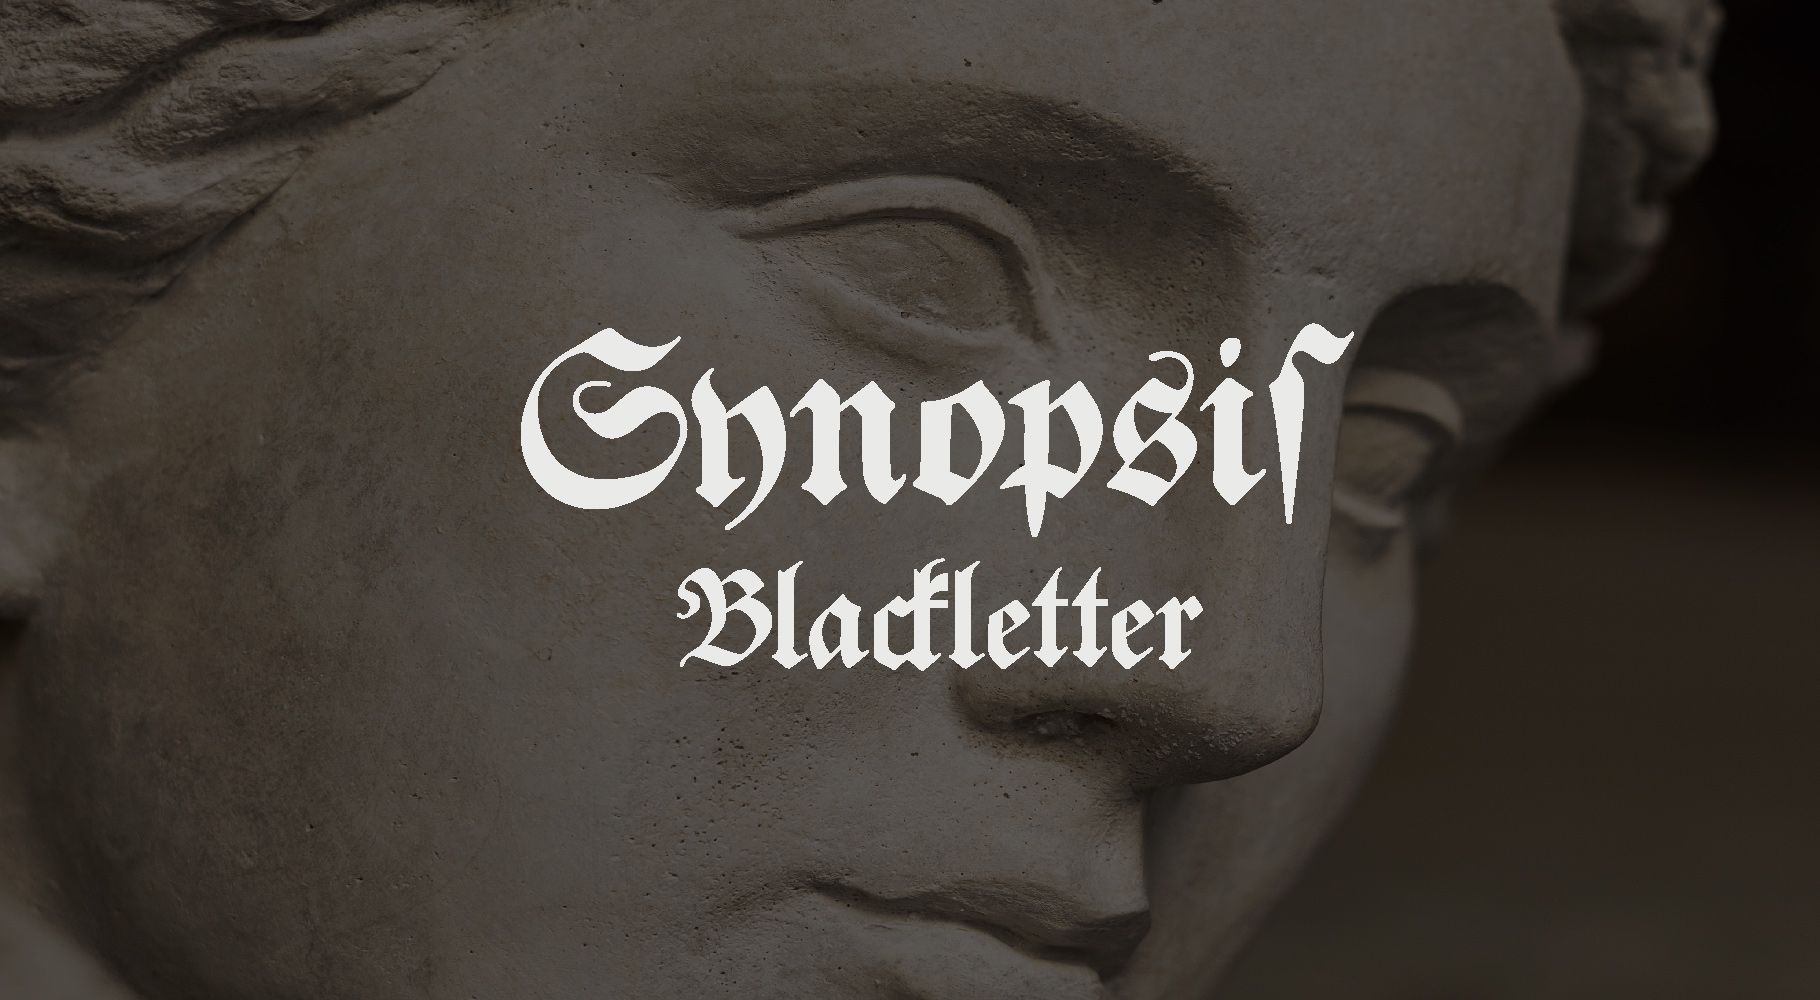 synopsis blackletter with a statue in the background